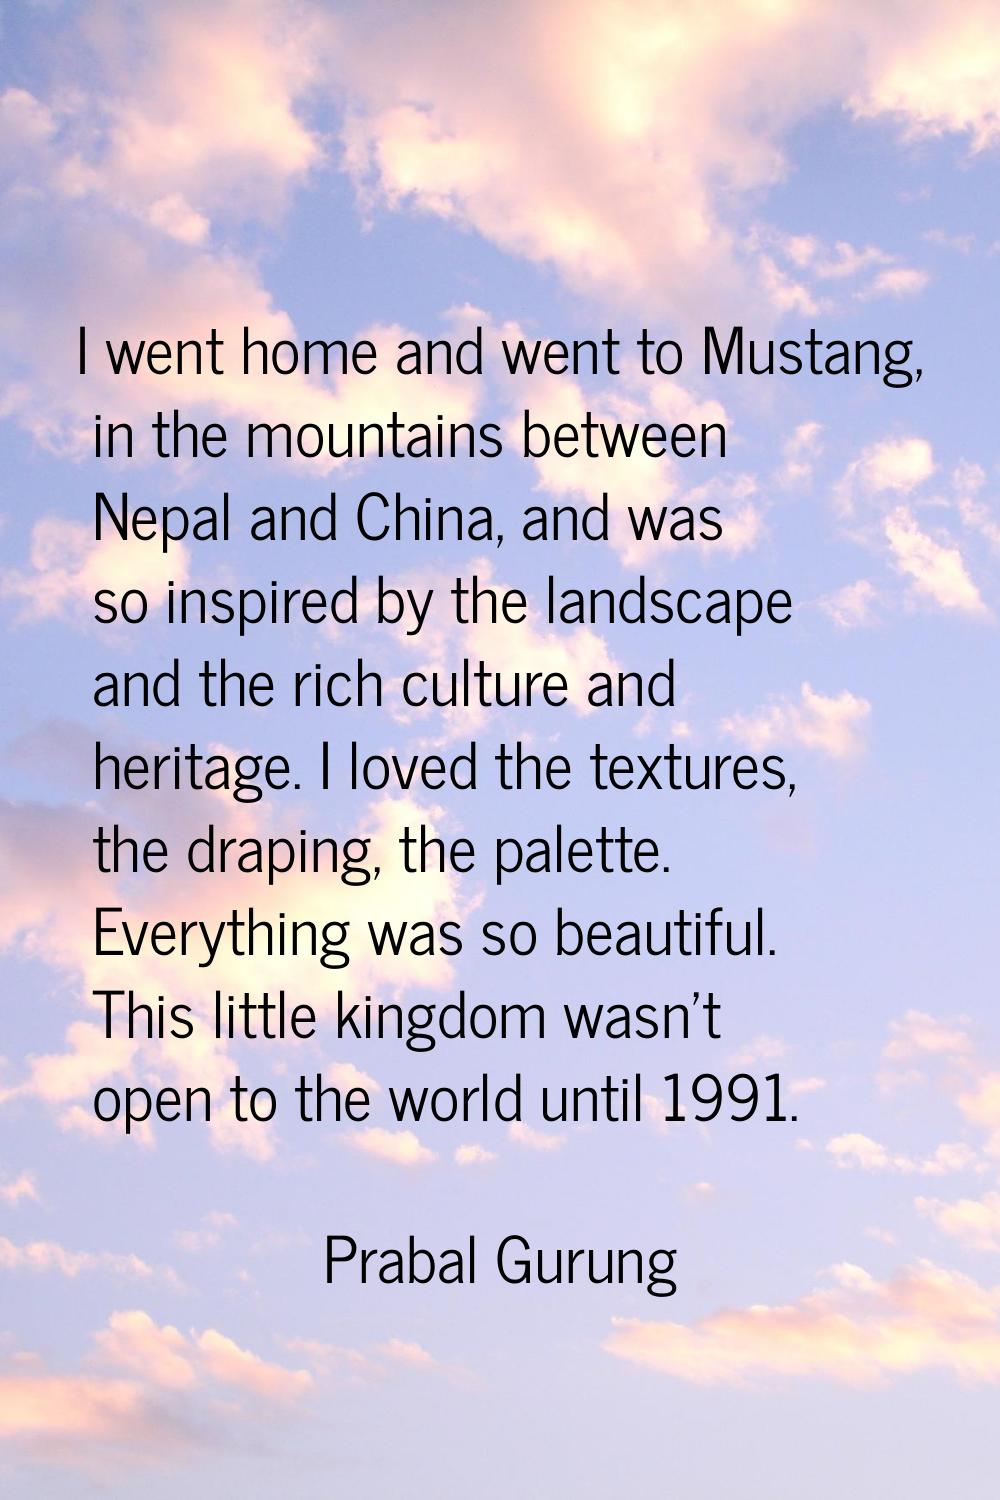 I went home and went to Mustang, in the mountains between Nepal and China, and was so inspired by t